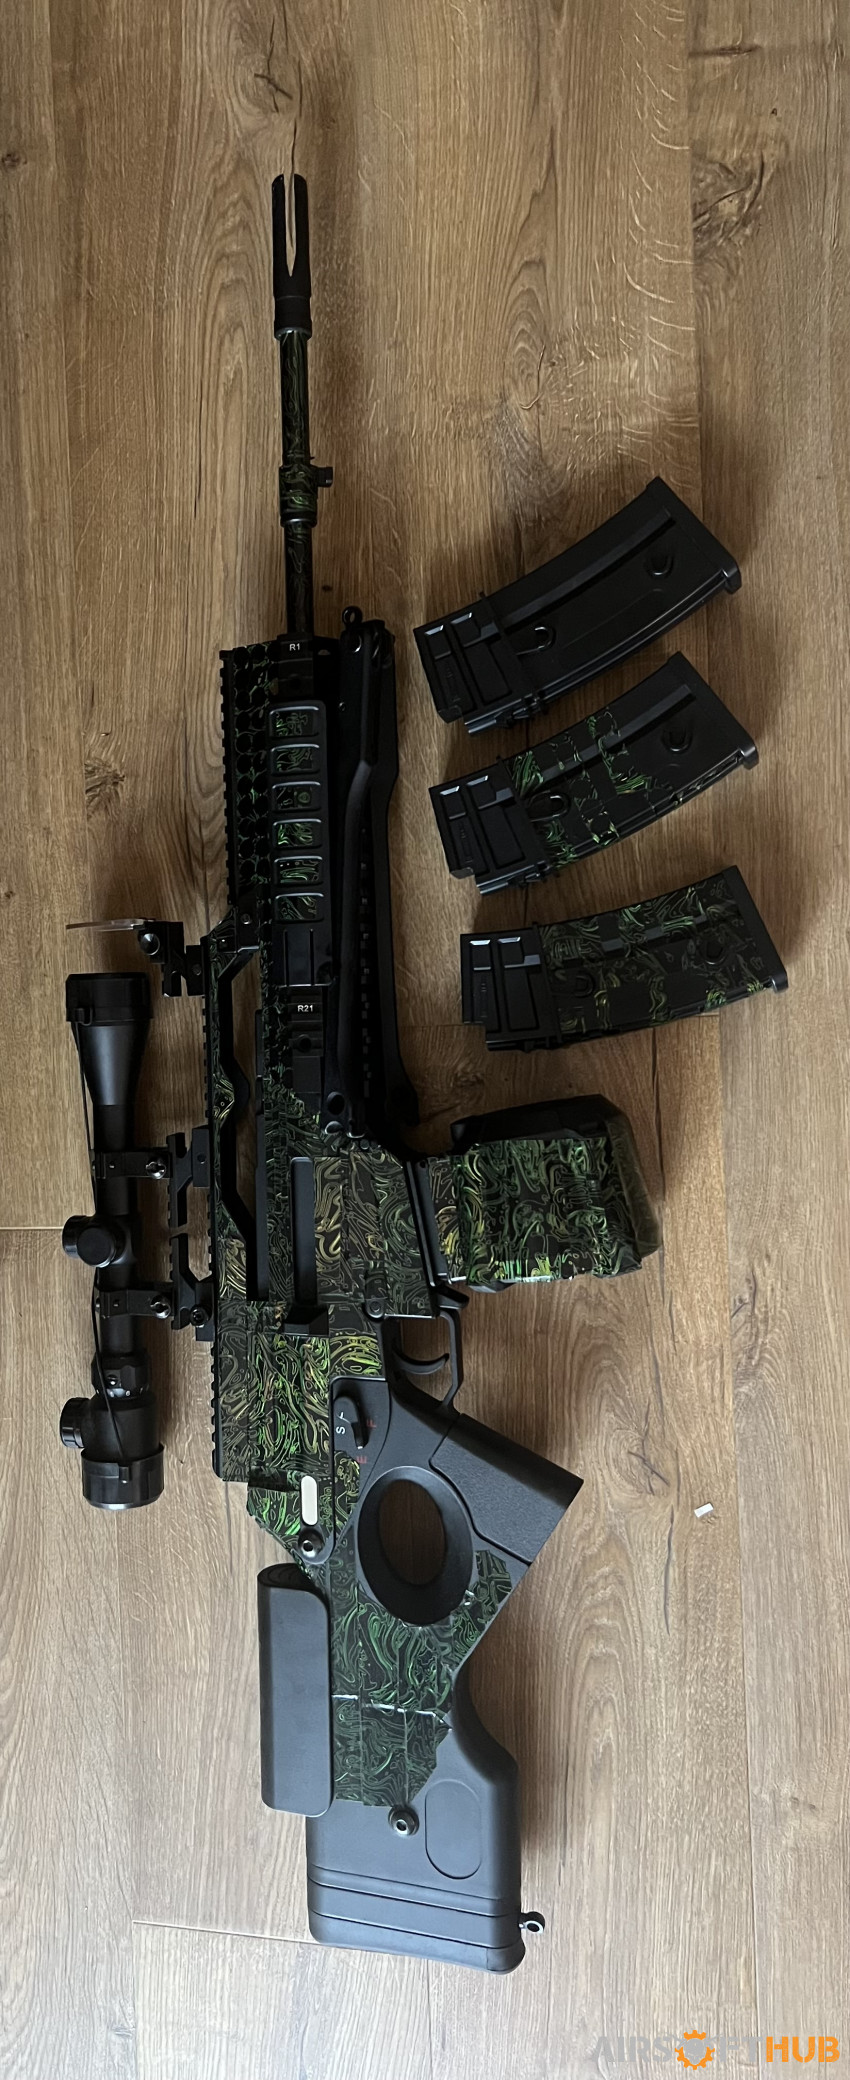 JG G608 w/drum mag and skin - Used airsoft equipment